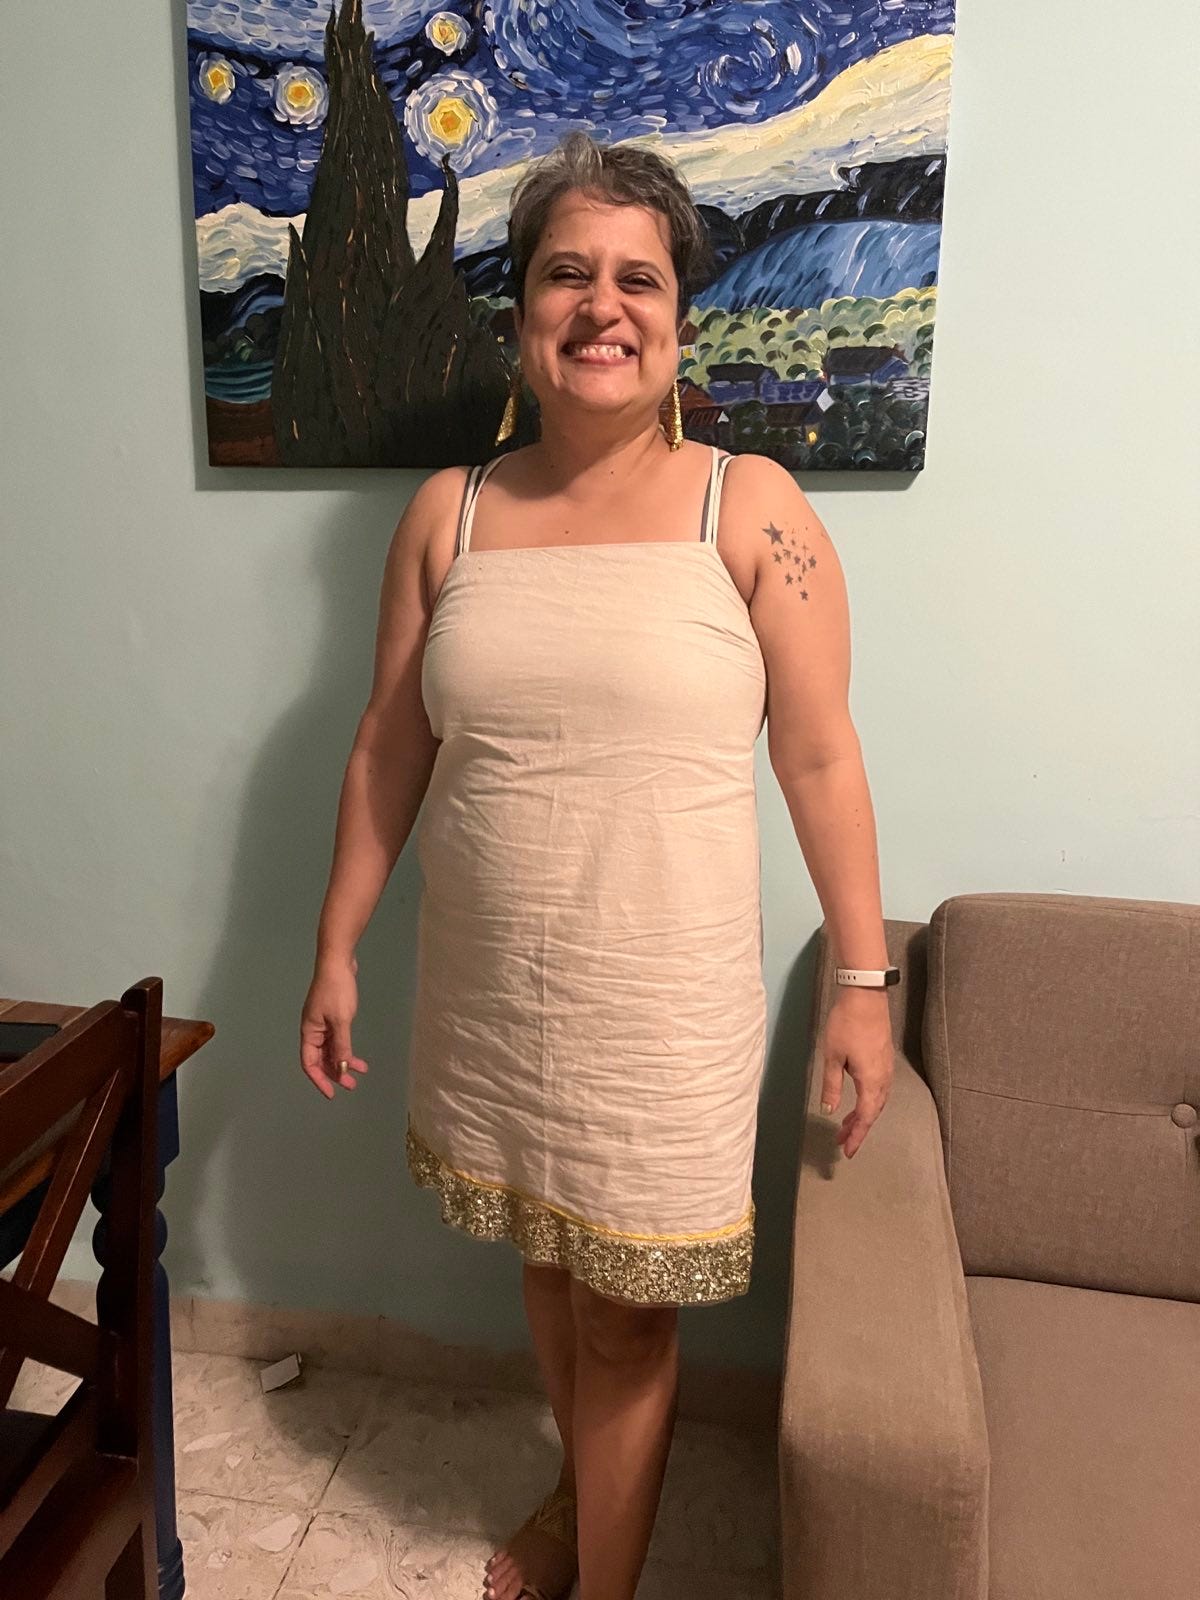 me in a short beige dress with sequins at the hem. a copy of Van Gogh's Starry Night is on the wall behind me.